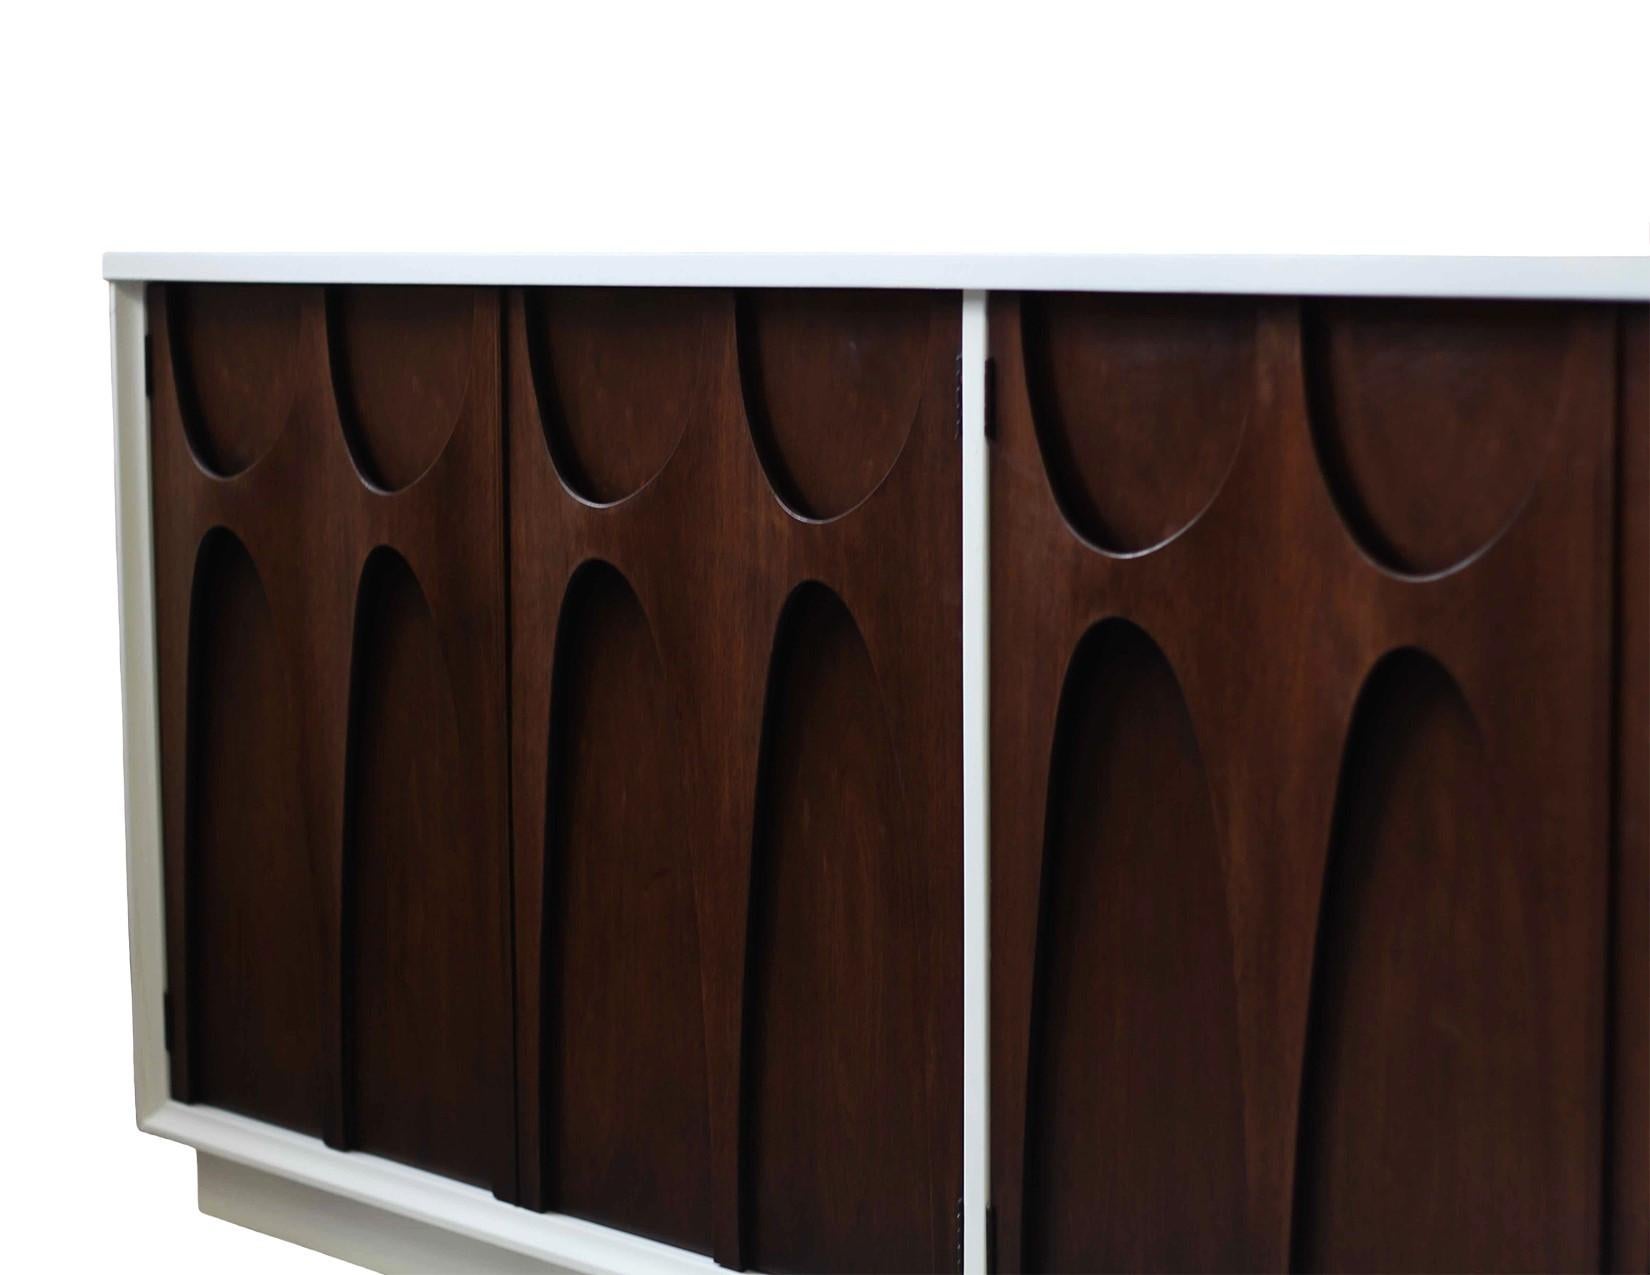 Two-toned Broyhill Brasilia Mid-Century Modern sculpted walnut credenza/sideboard. It features white lacquered exterior with a gorgeous dark stained walnut wood front, with sculpted arches and original pulls. It offers ample room for storage with